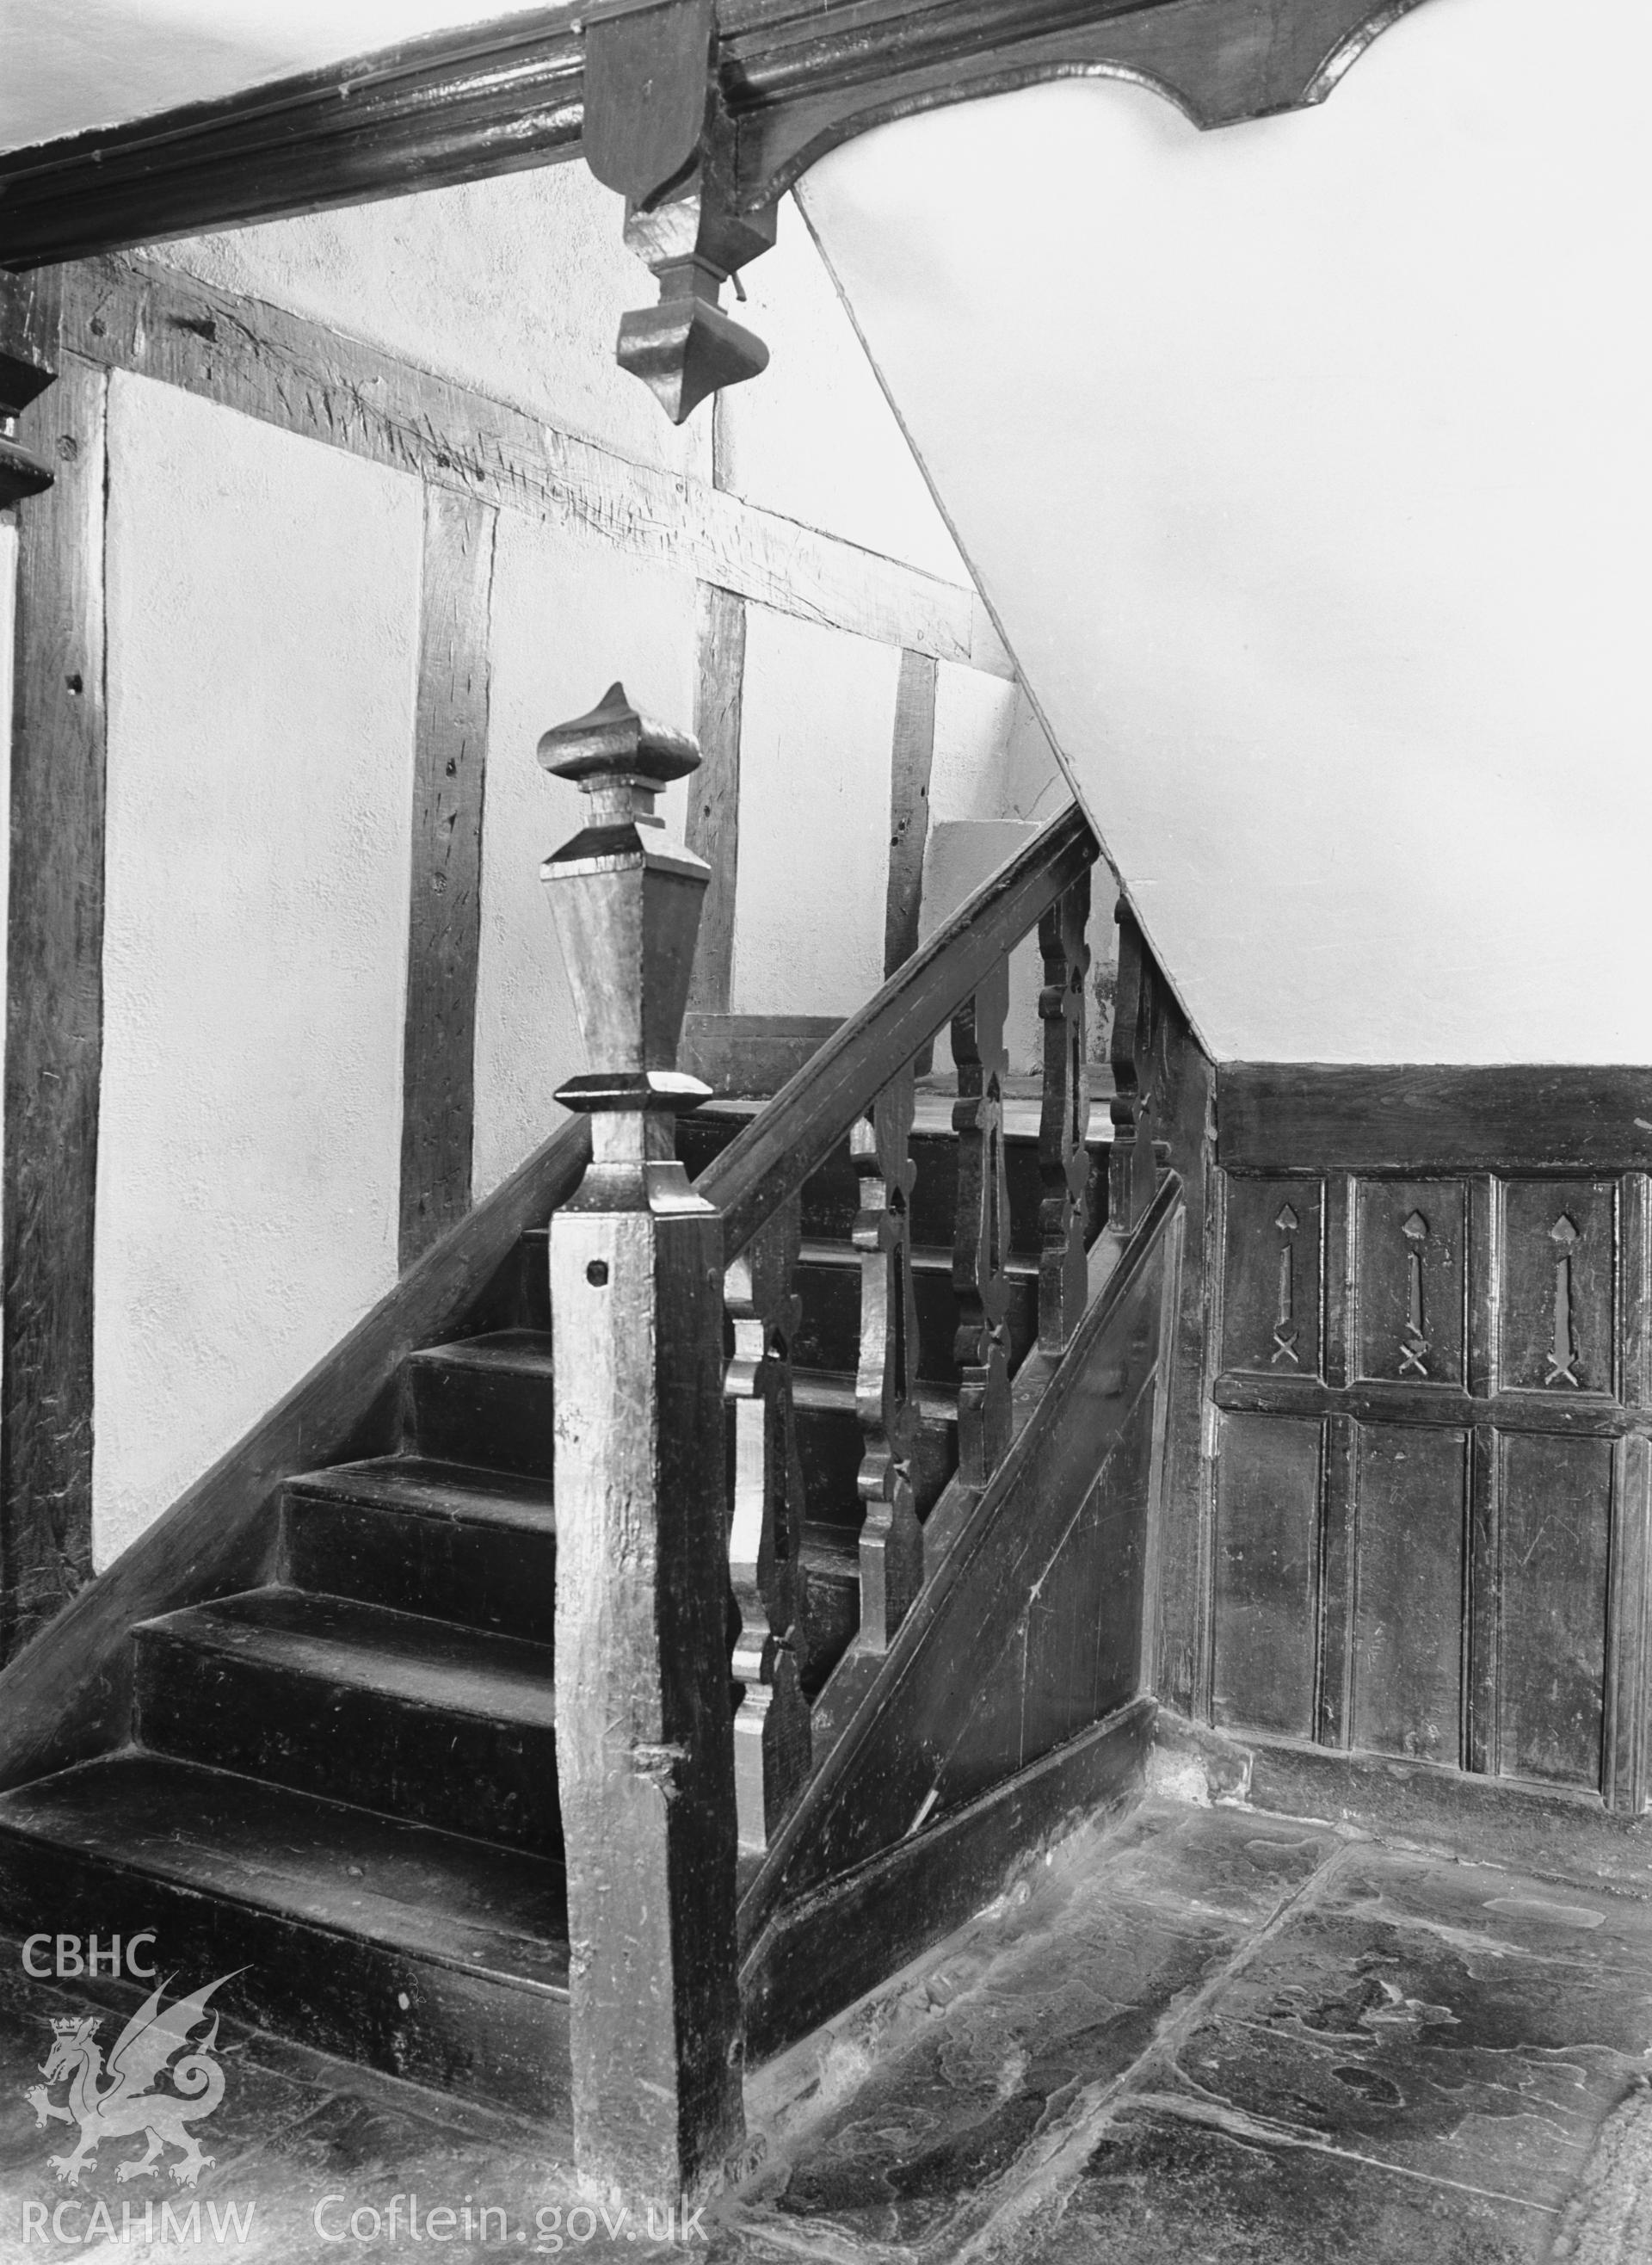 Interior view showing staircase.